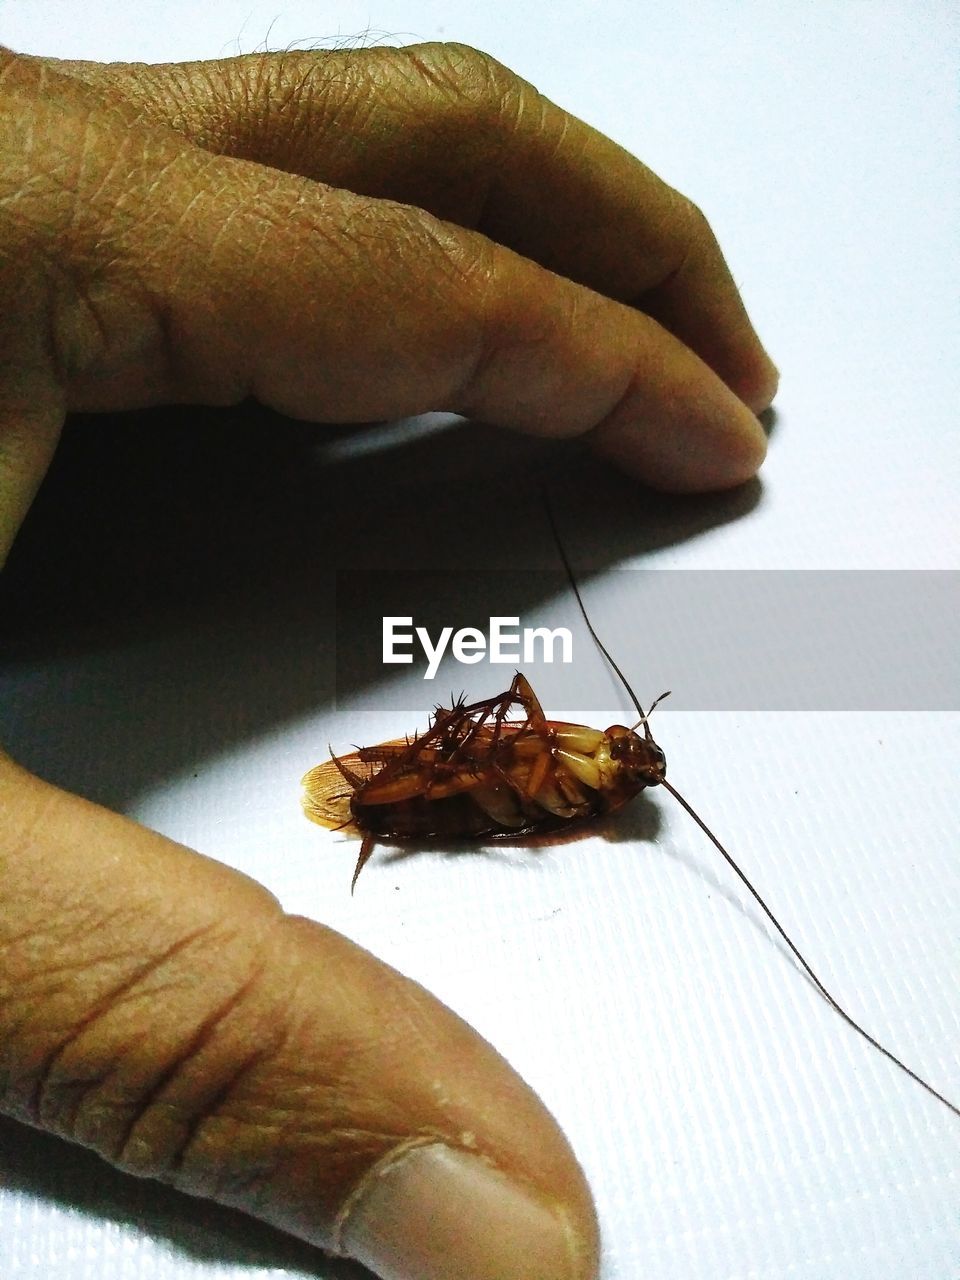 CLOSE-UP OF INSECT ON HAND